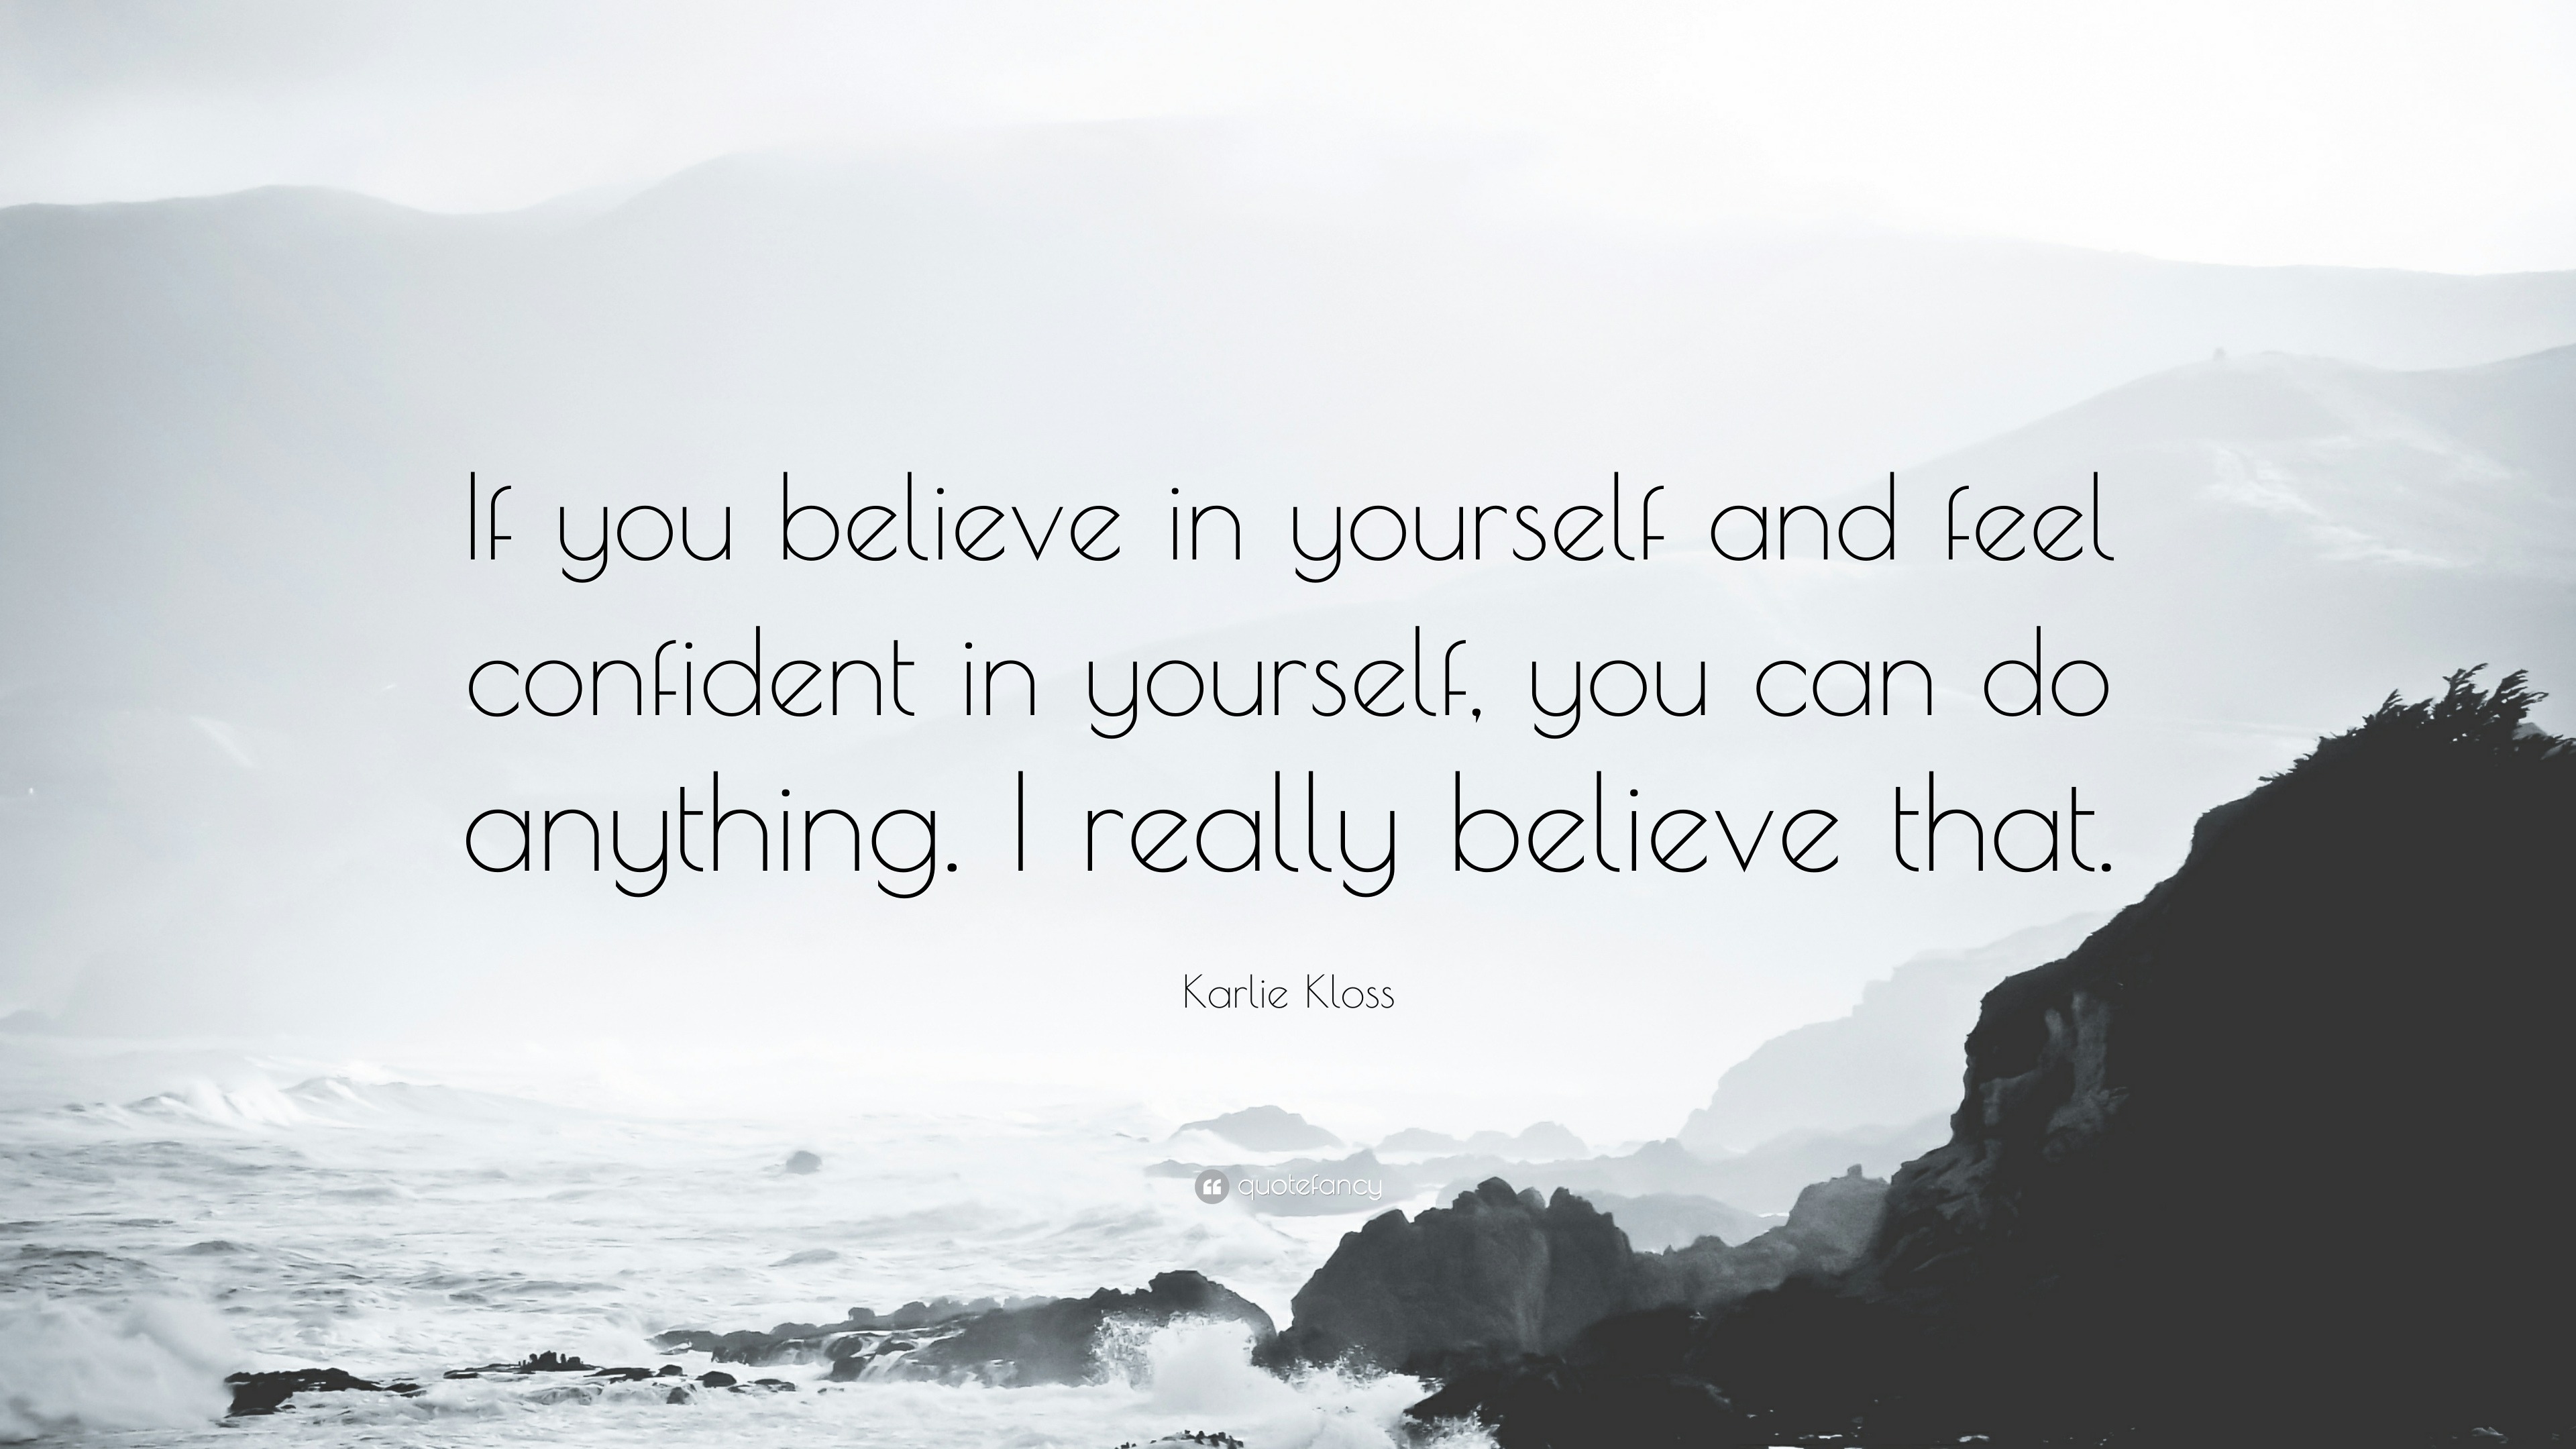 ❤️🔥 Love yourself and believe that you can do it! ✨️ Belief